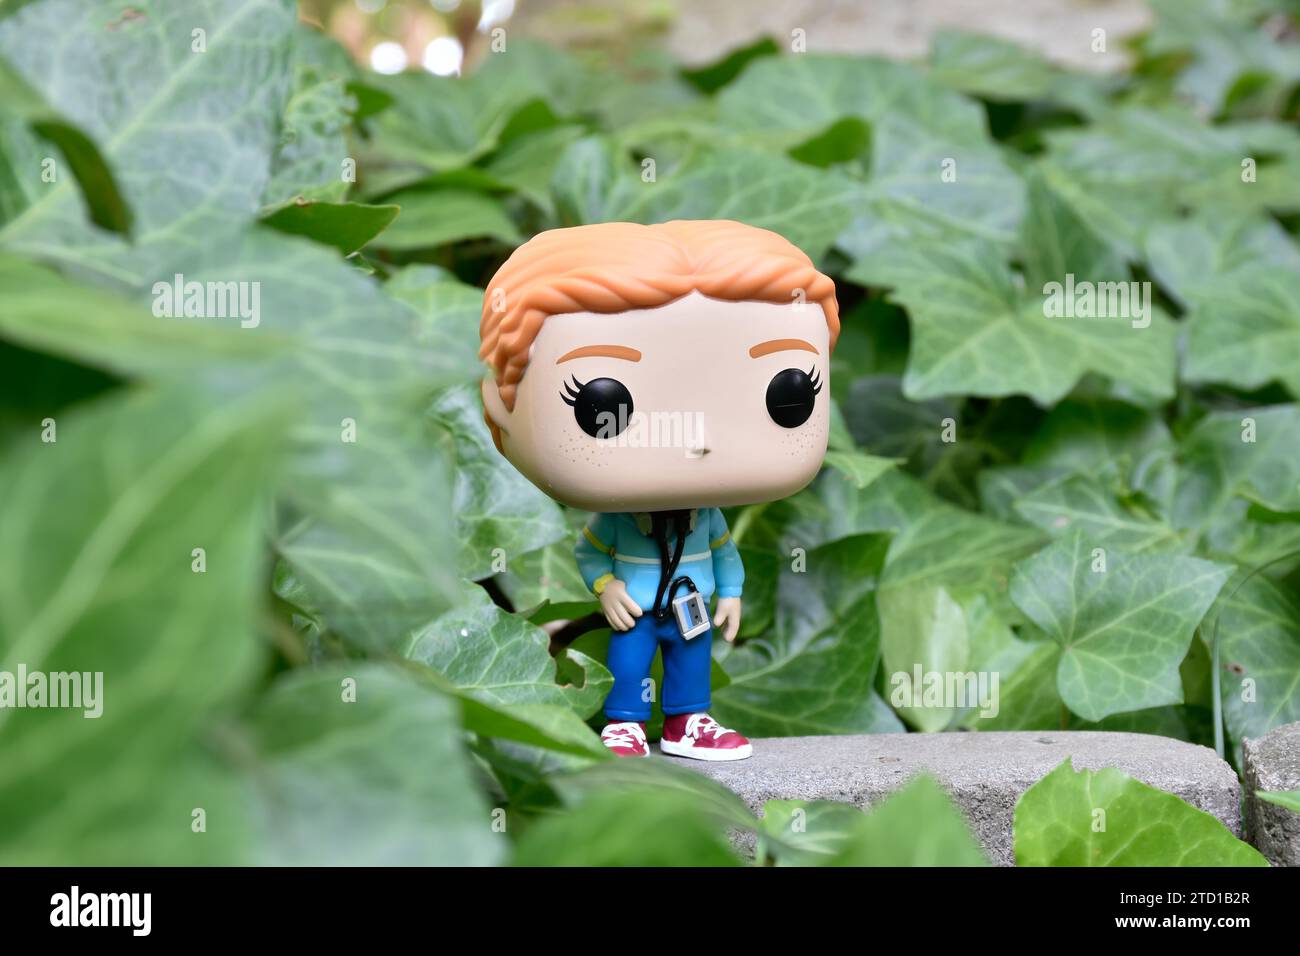 Funko Pop action figure of Max Mayfield with cassette player from Netflix TV series Stranger Things. Green ivy plant leaves, abandoned garden. Stock Photo